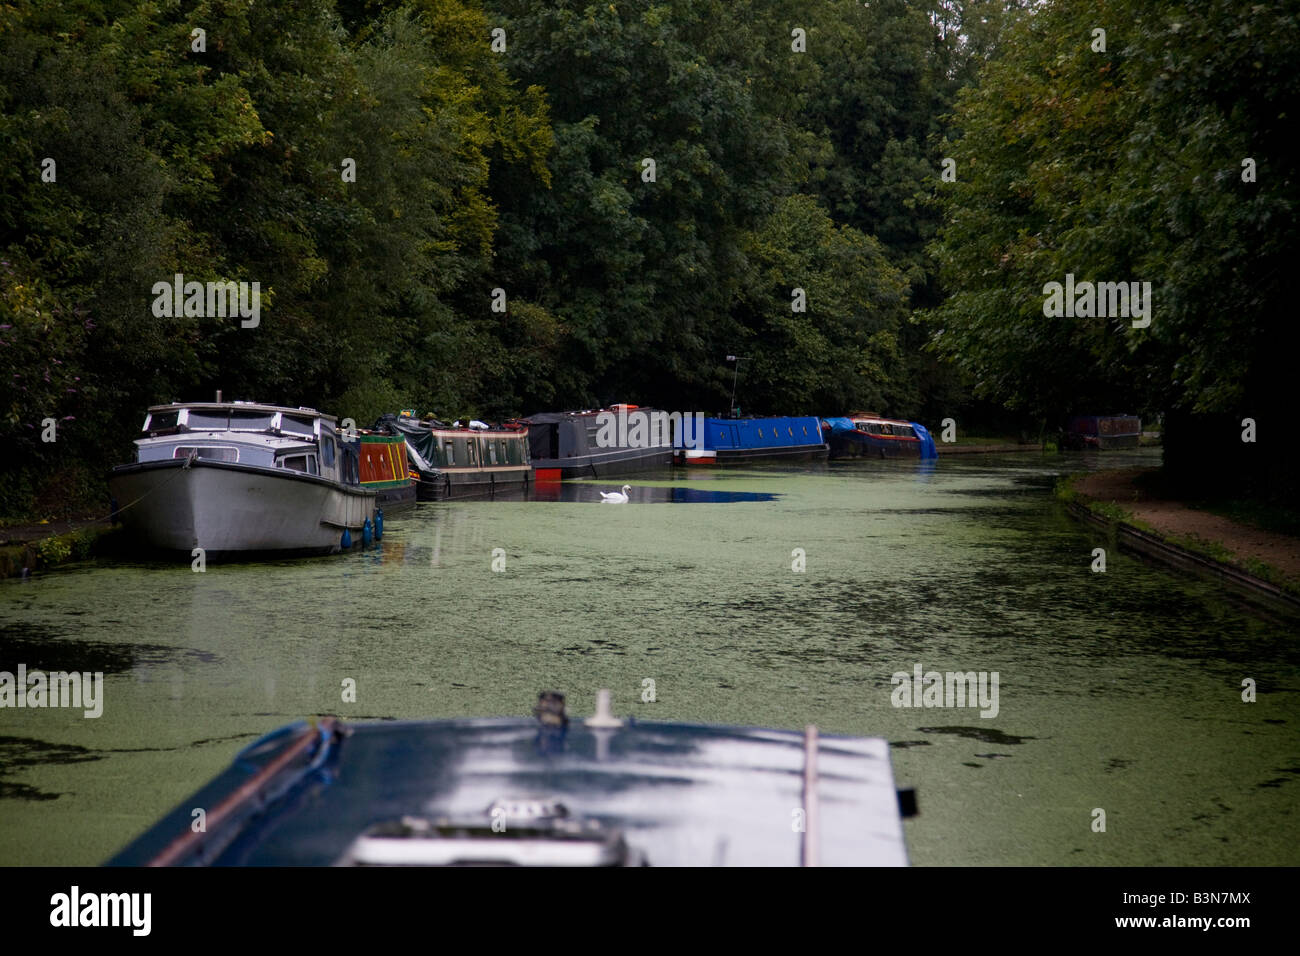 Narrow boat travelling up Grand Union Canal towards Uxbridge. Duck weed covers the water. Boats moored along canal side. Stock Photo